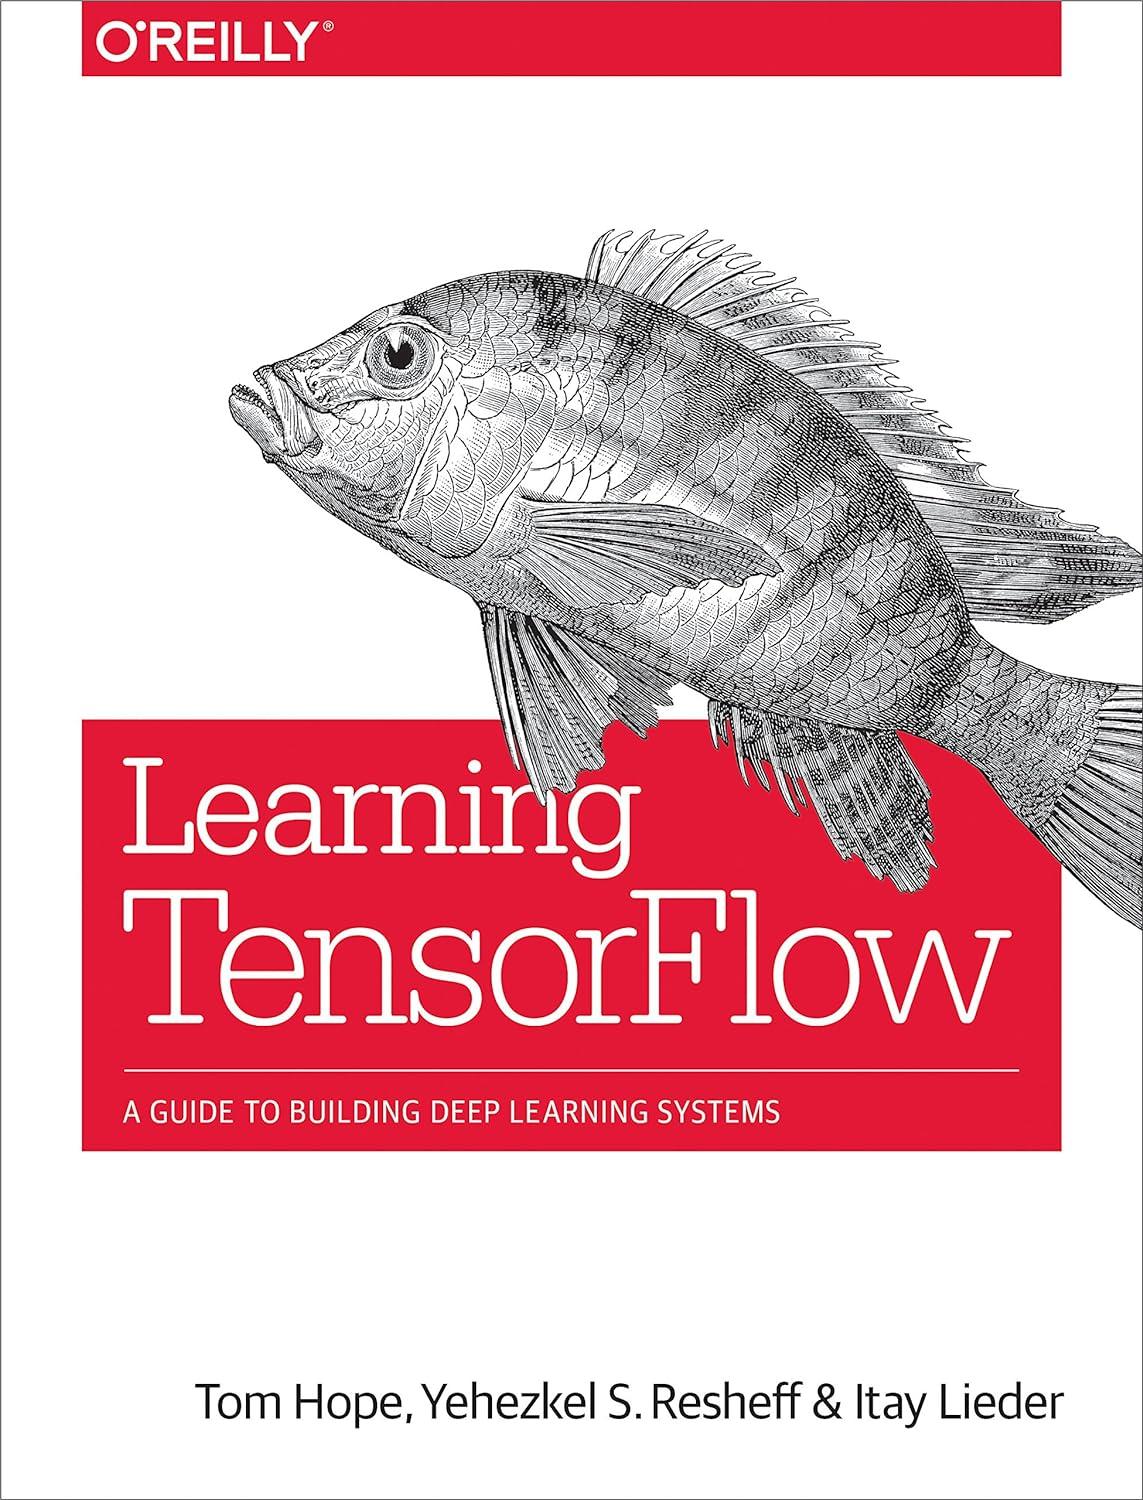 learning tensorflow  a guide to building deep learning systems 1st edition tom hope, yehezkel resheff, itay